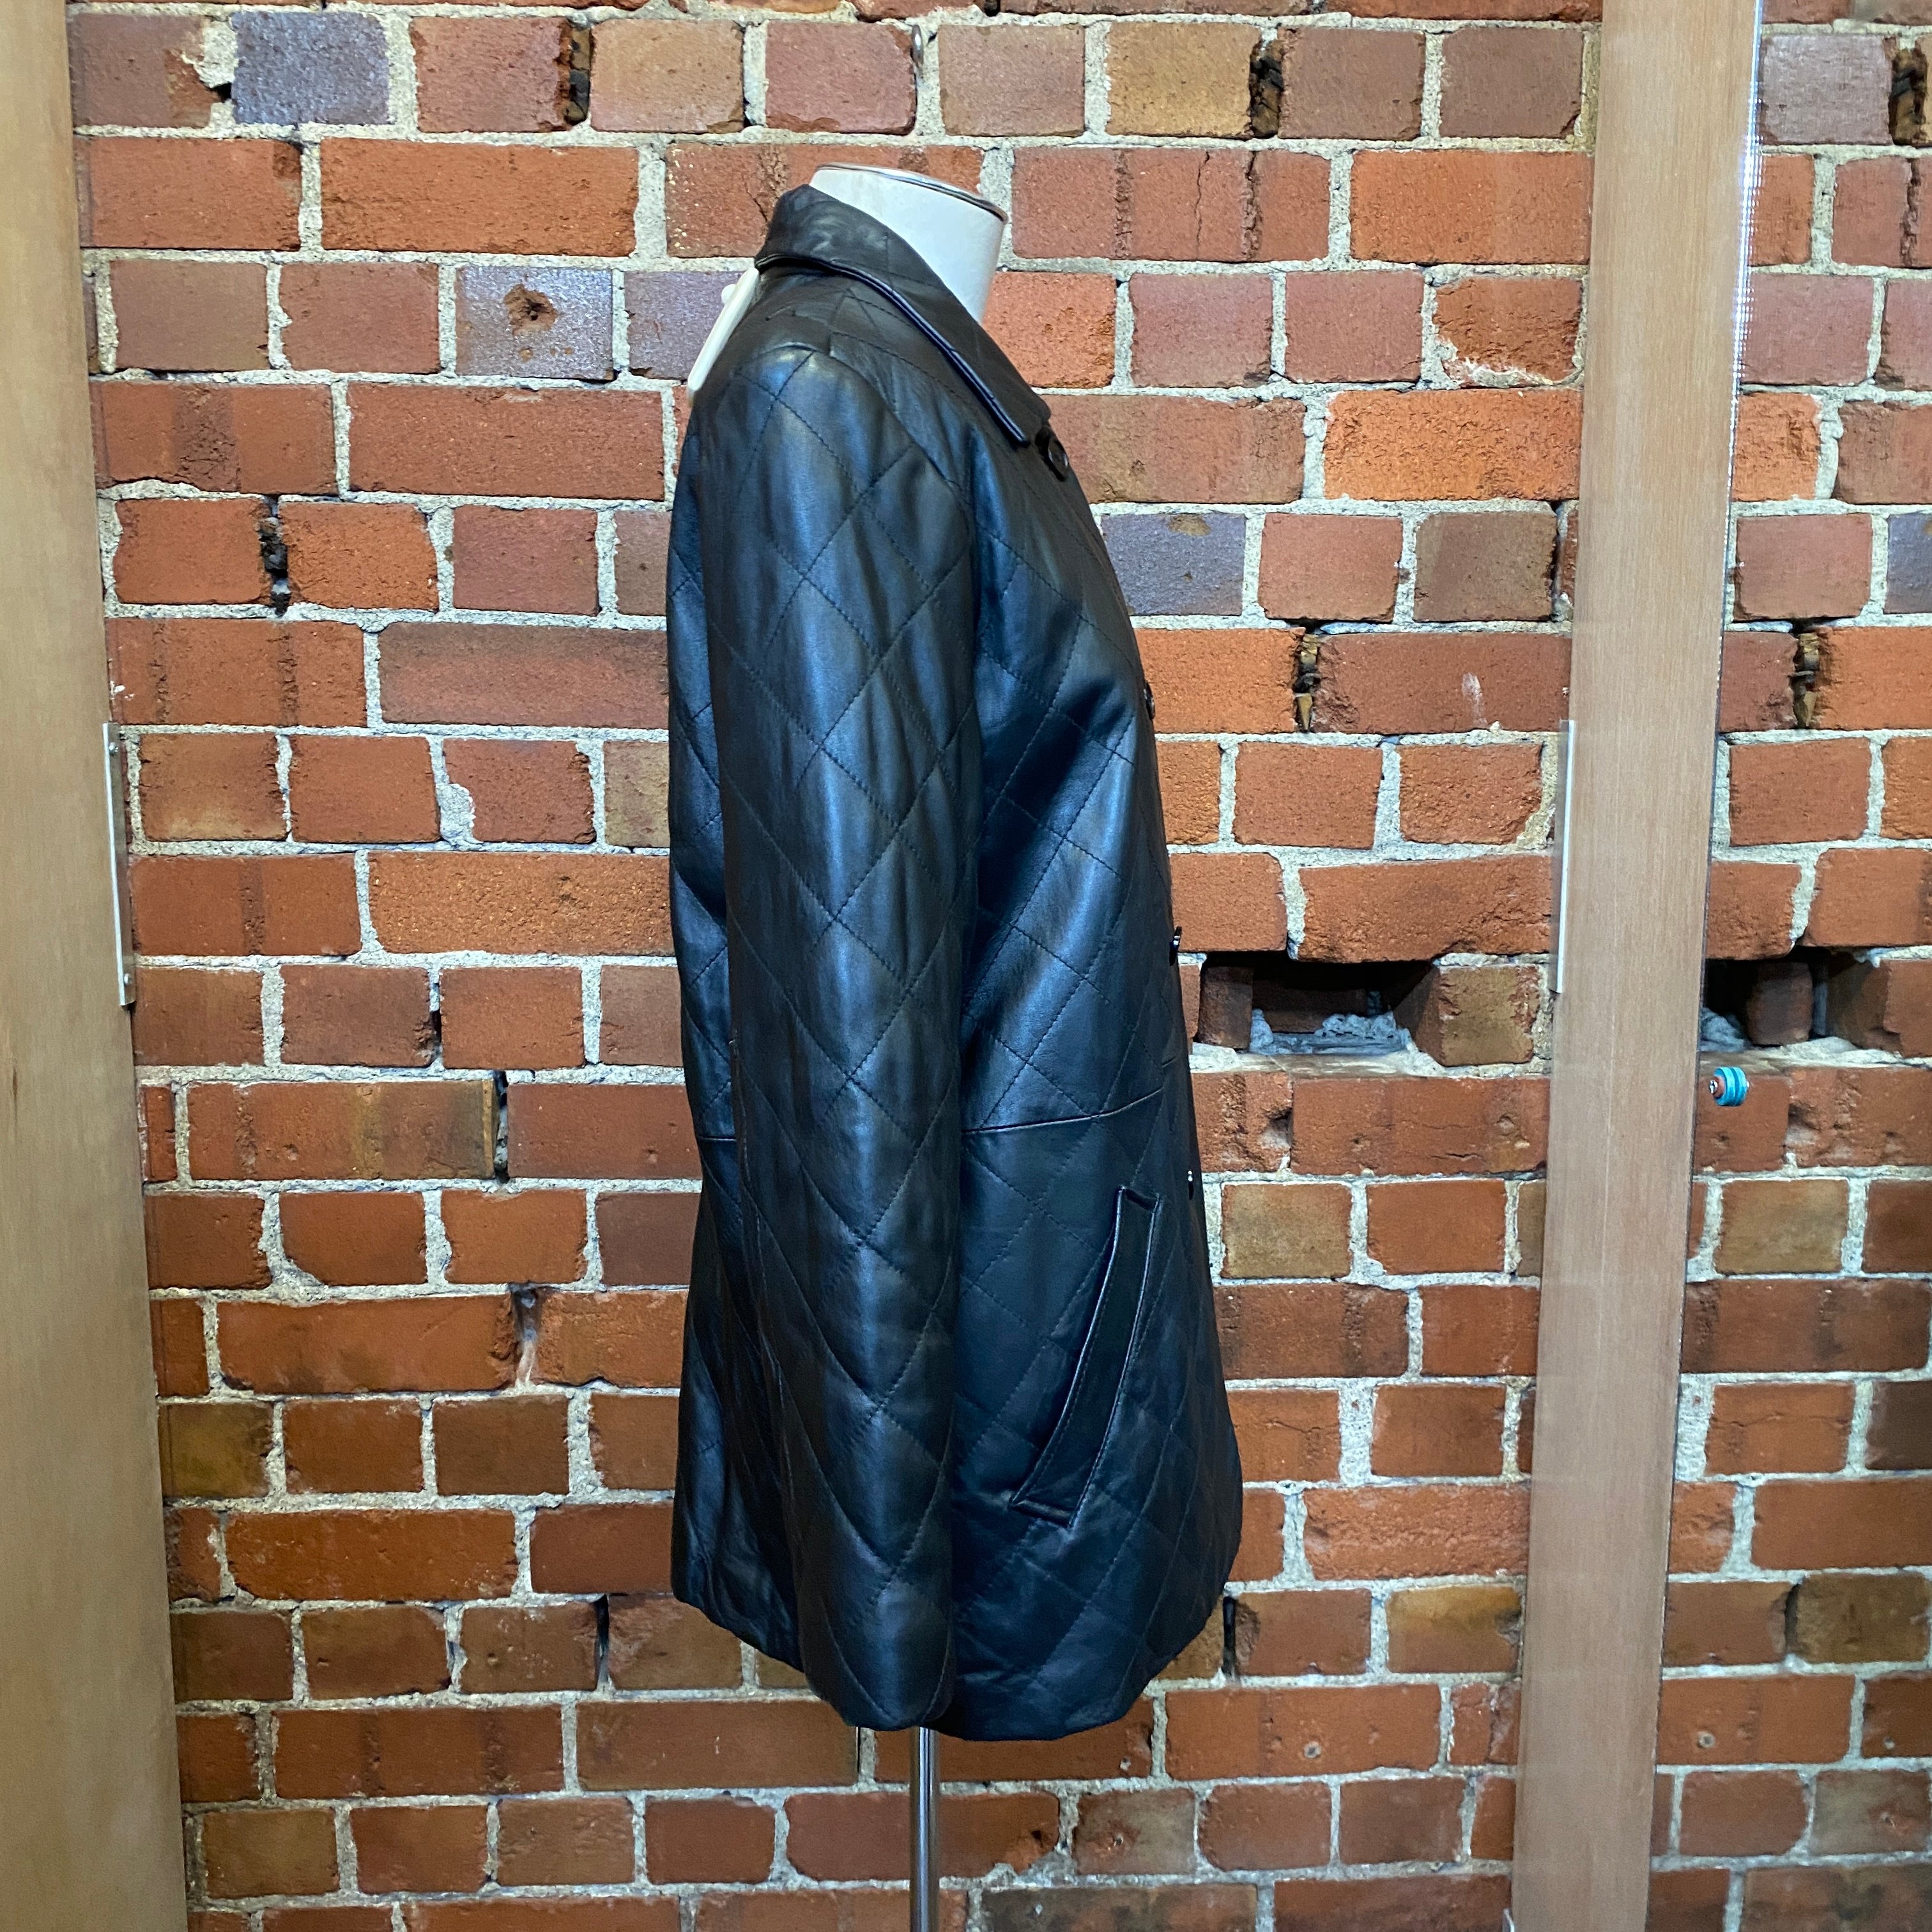 QUILTED leather jacket